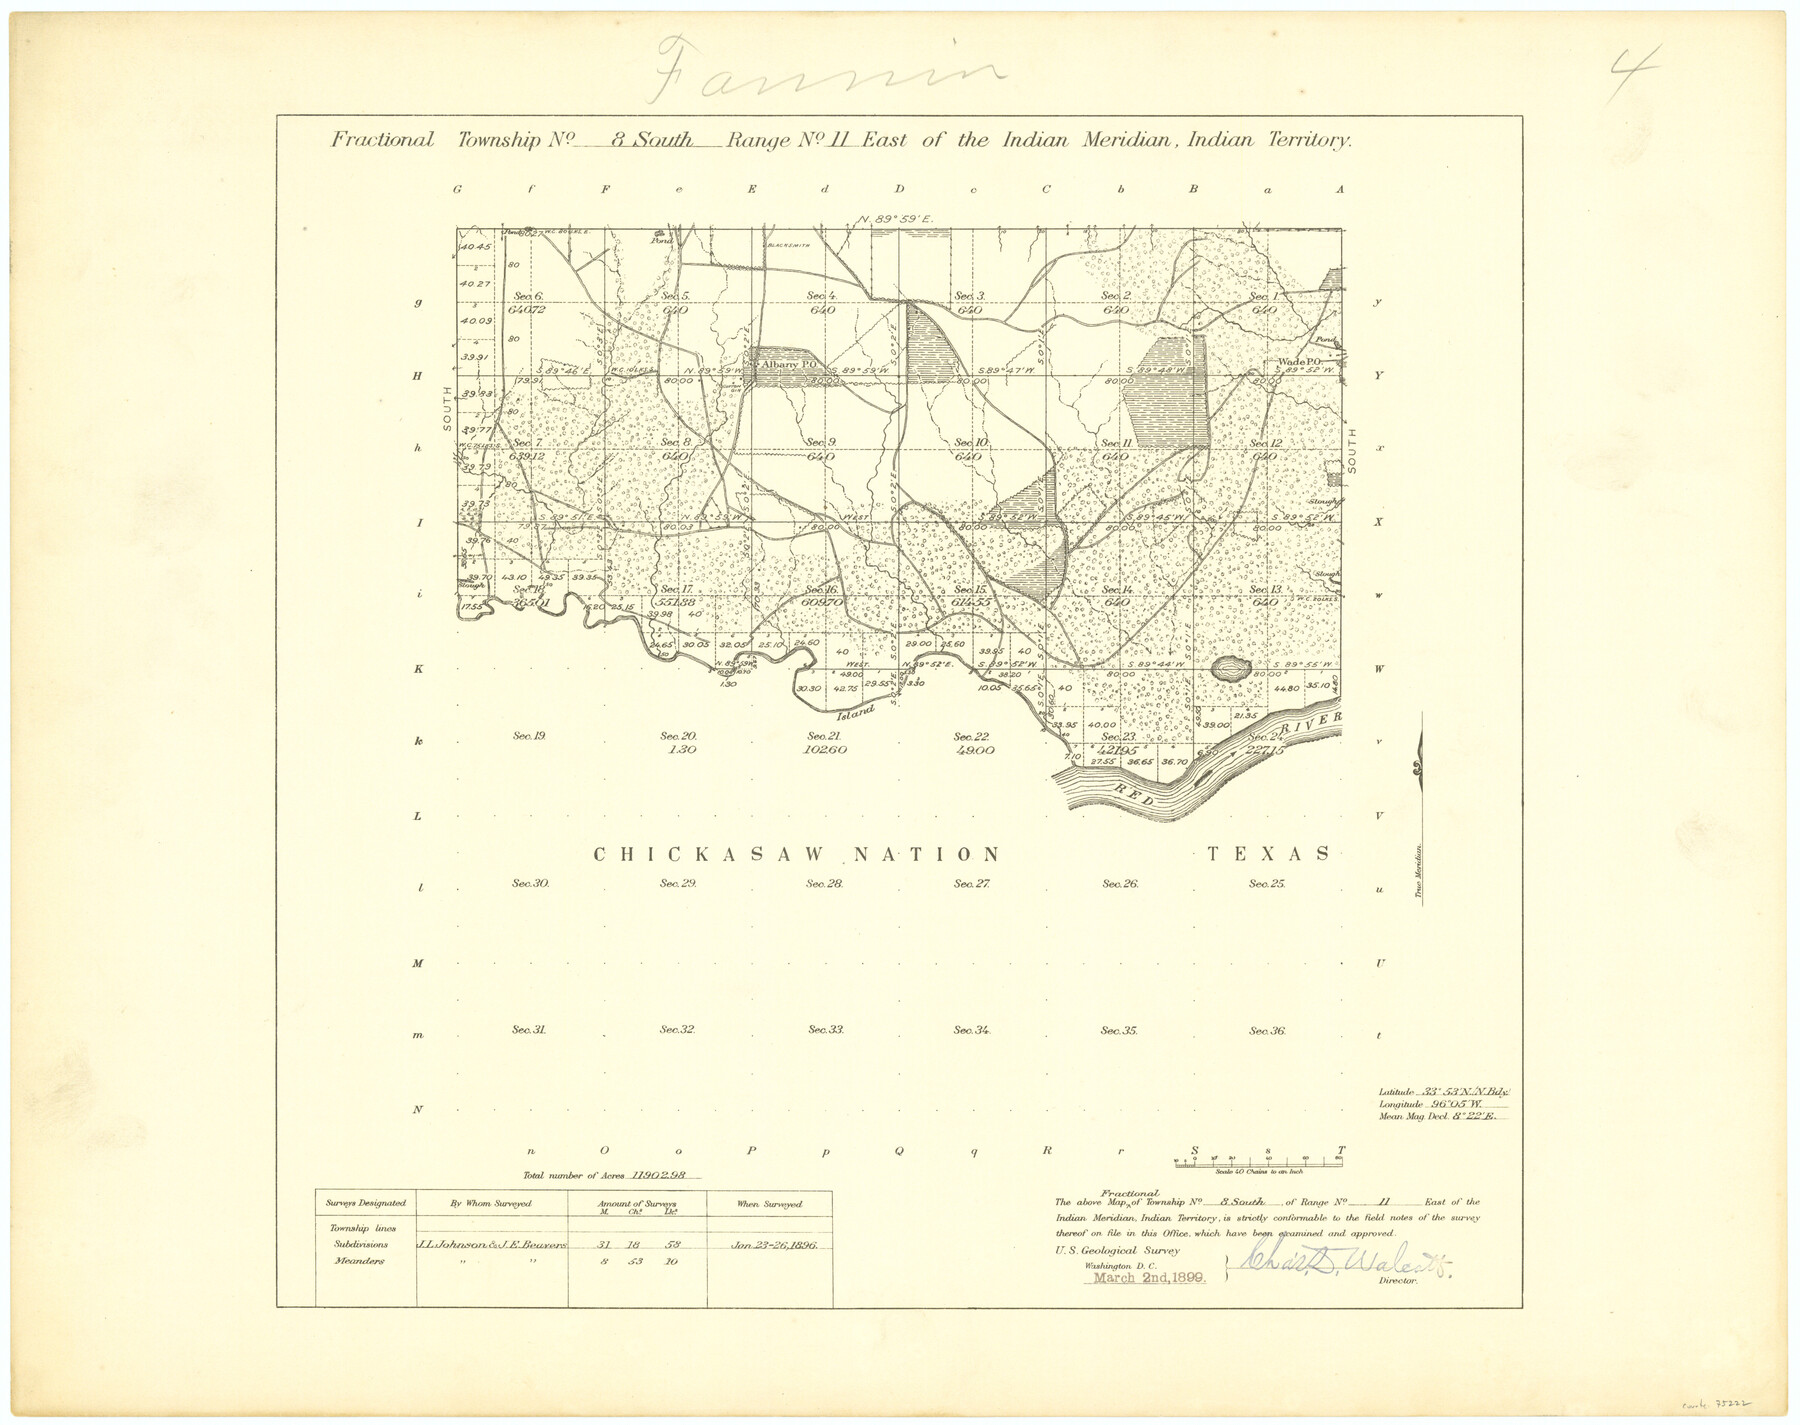 75222, Fractional Township No. 8 South Range No. 11 East of the Indian Meridian, Indian Territory, General Map Collection